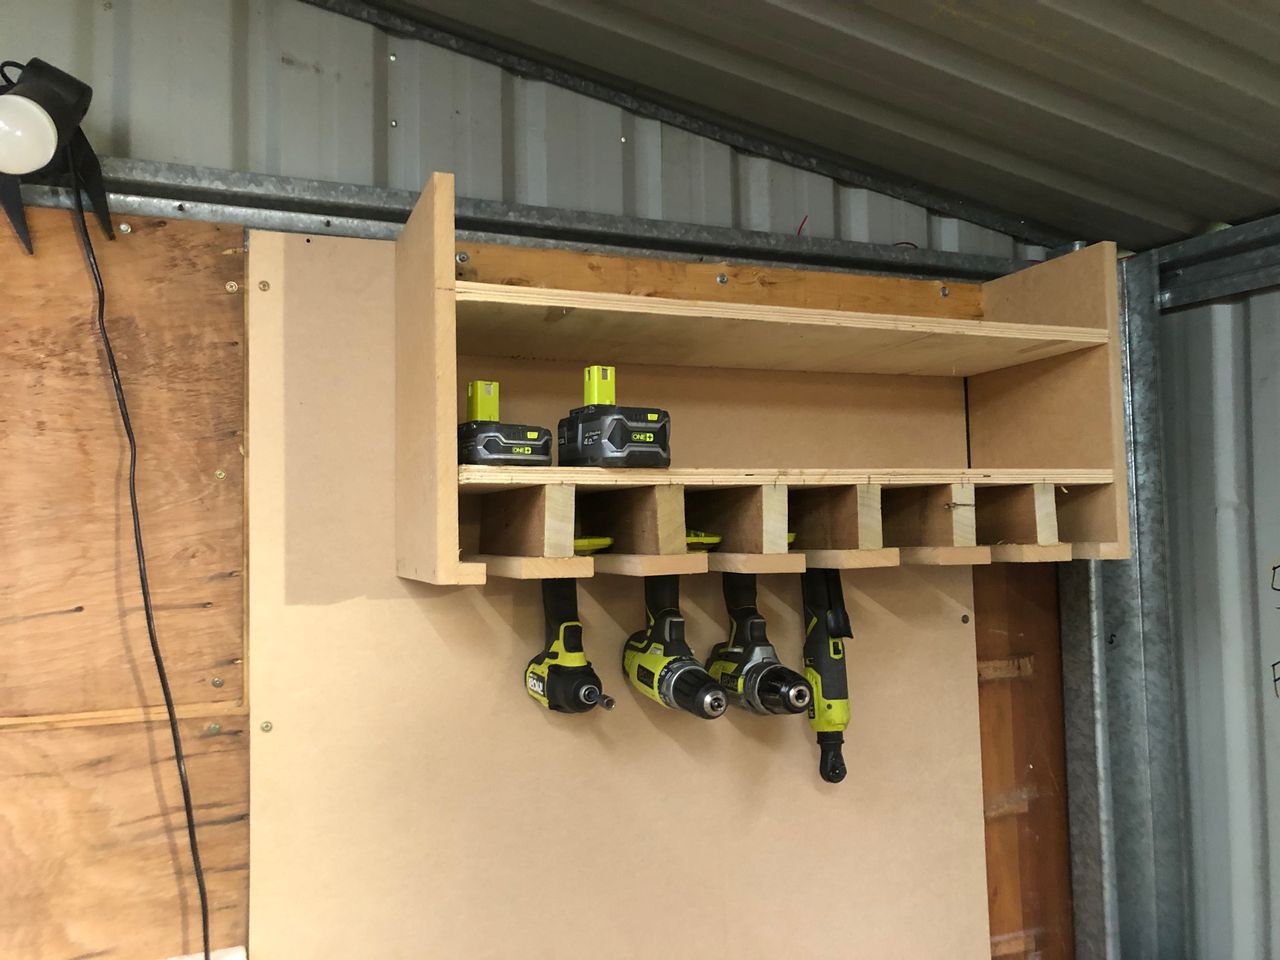 Ryobi shelf storage for my shed. Made from pallet timber and offcuts of MDF